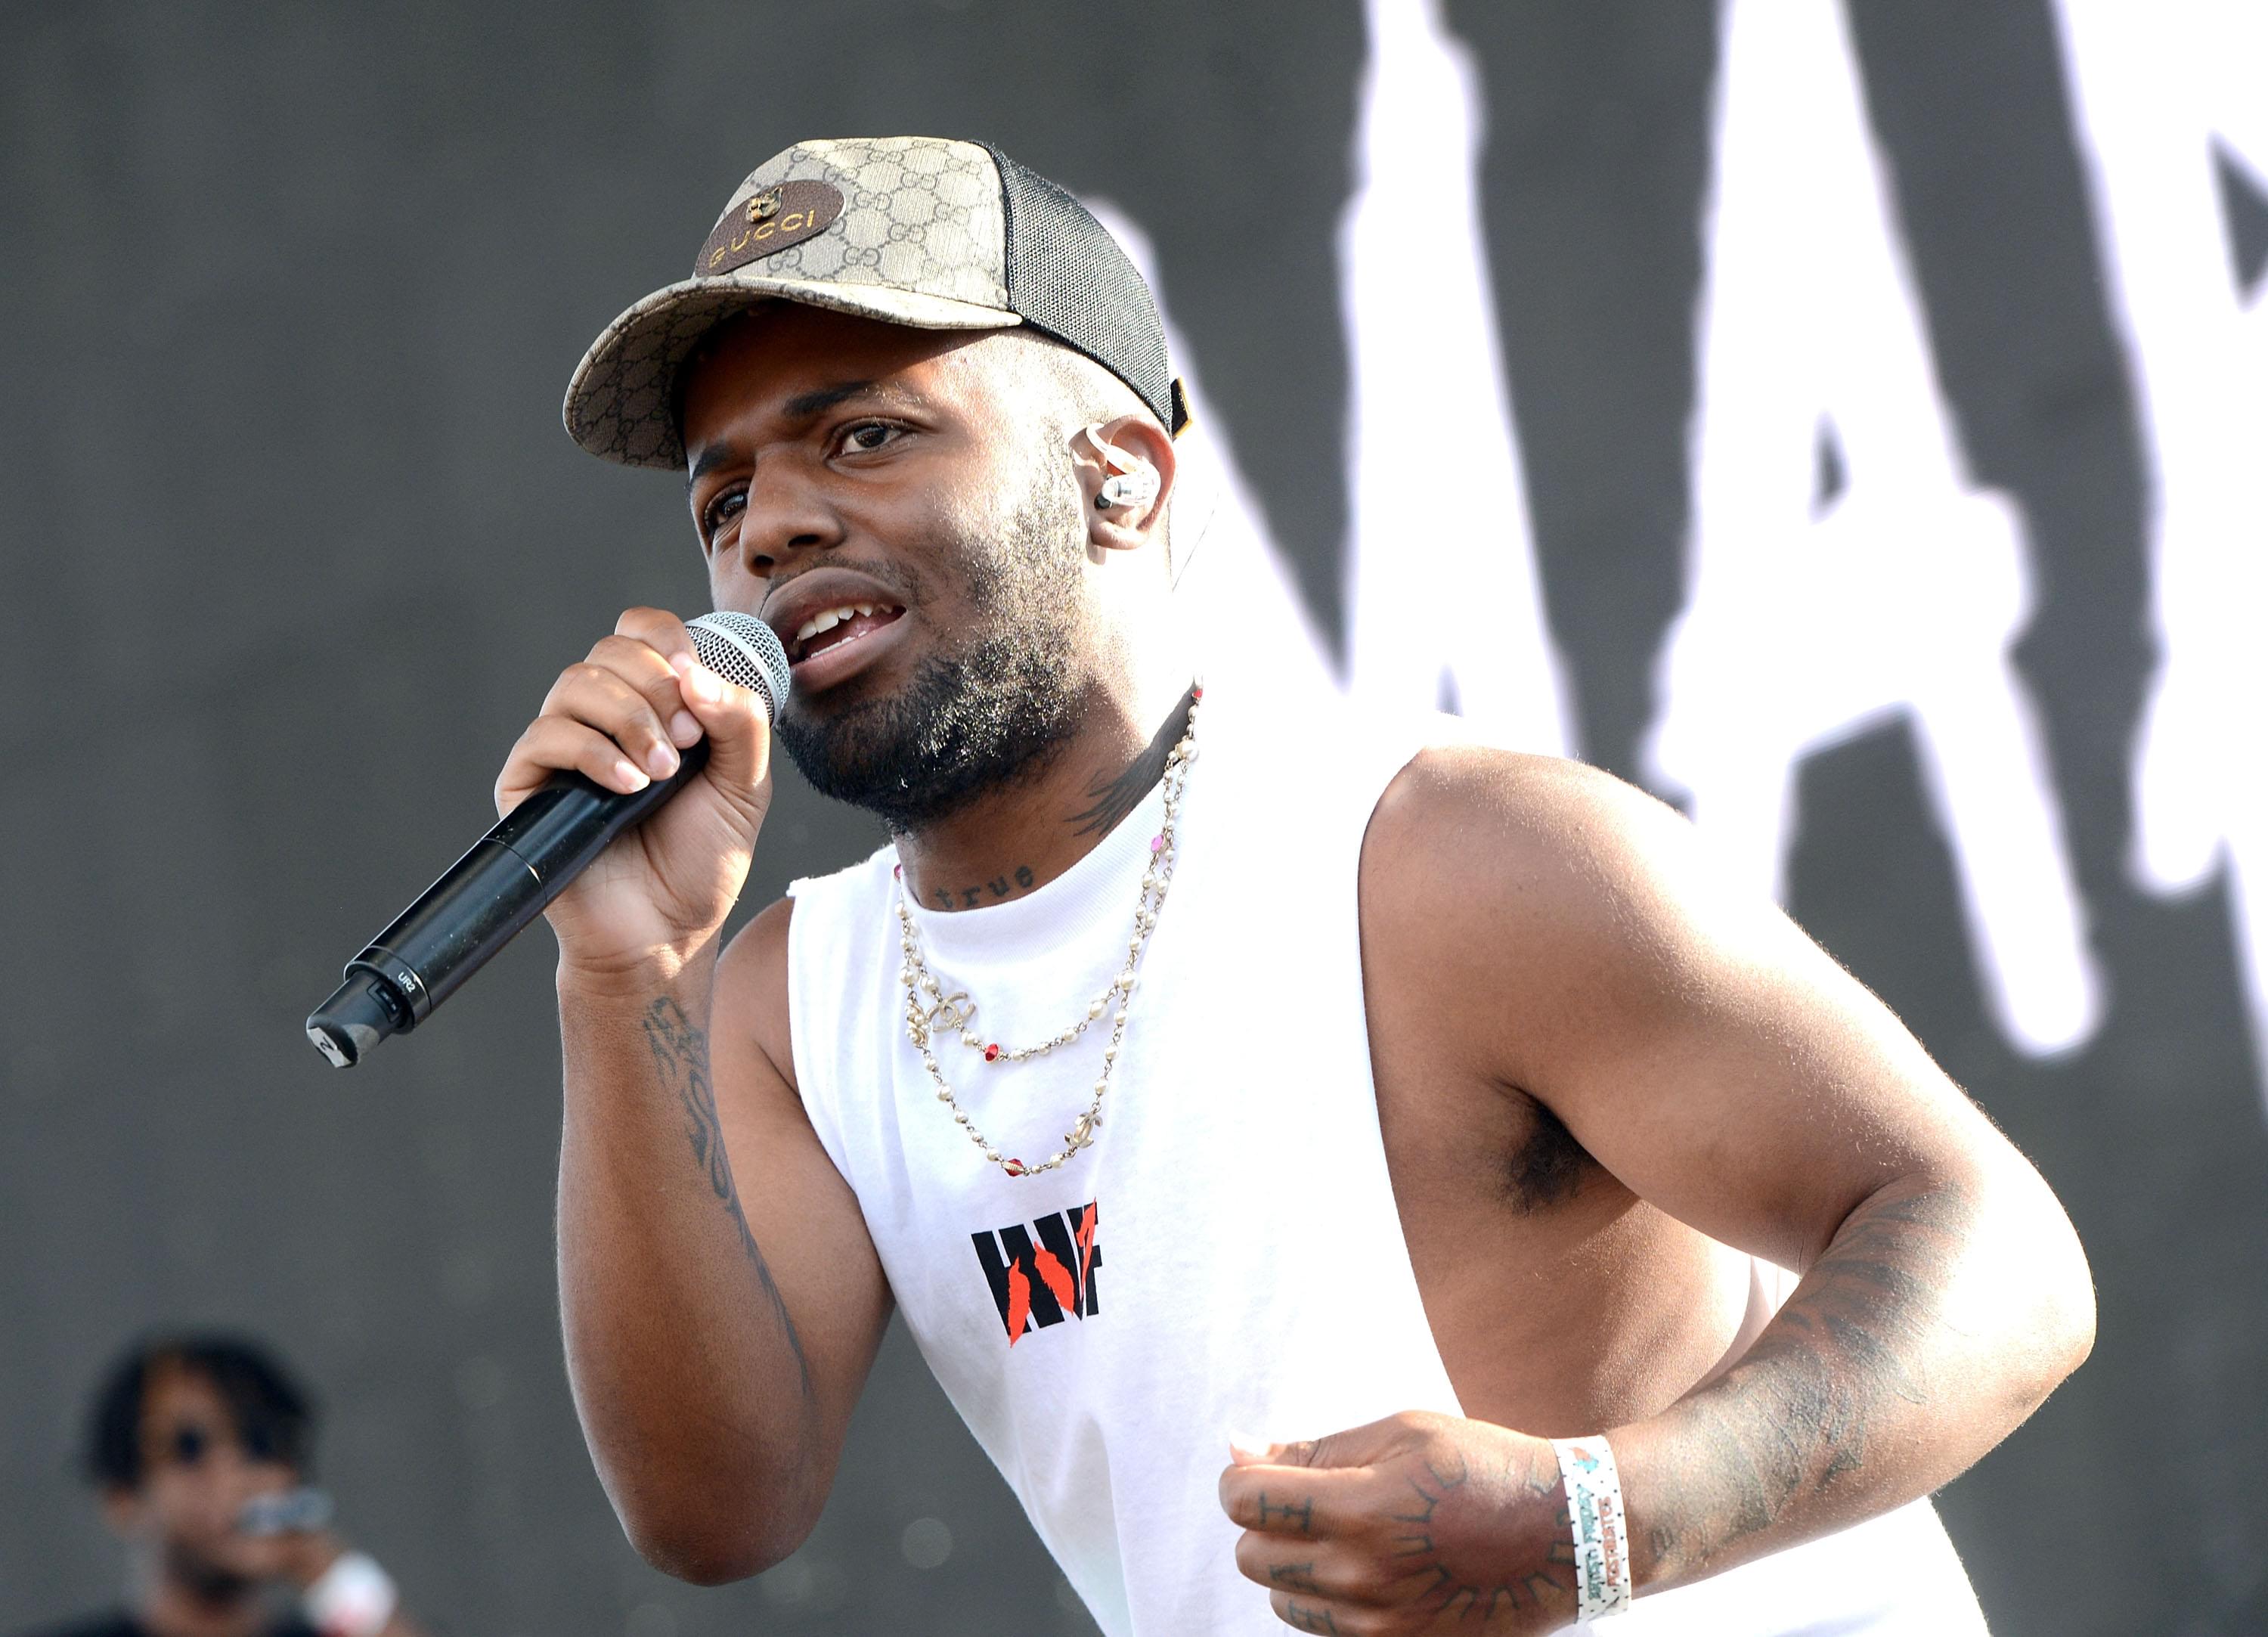 Madeintyo Remixes All The Hottest Rap Songs In “Bigger Than Me”